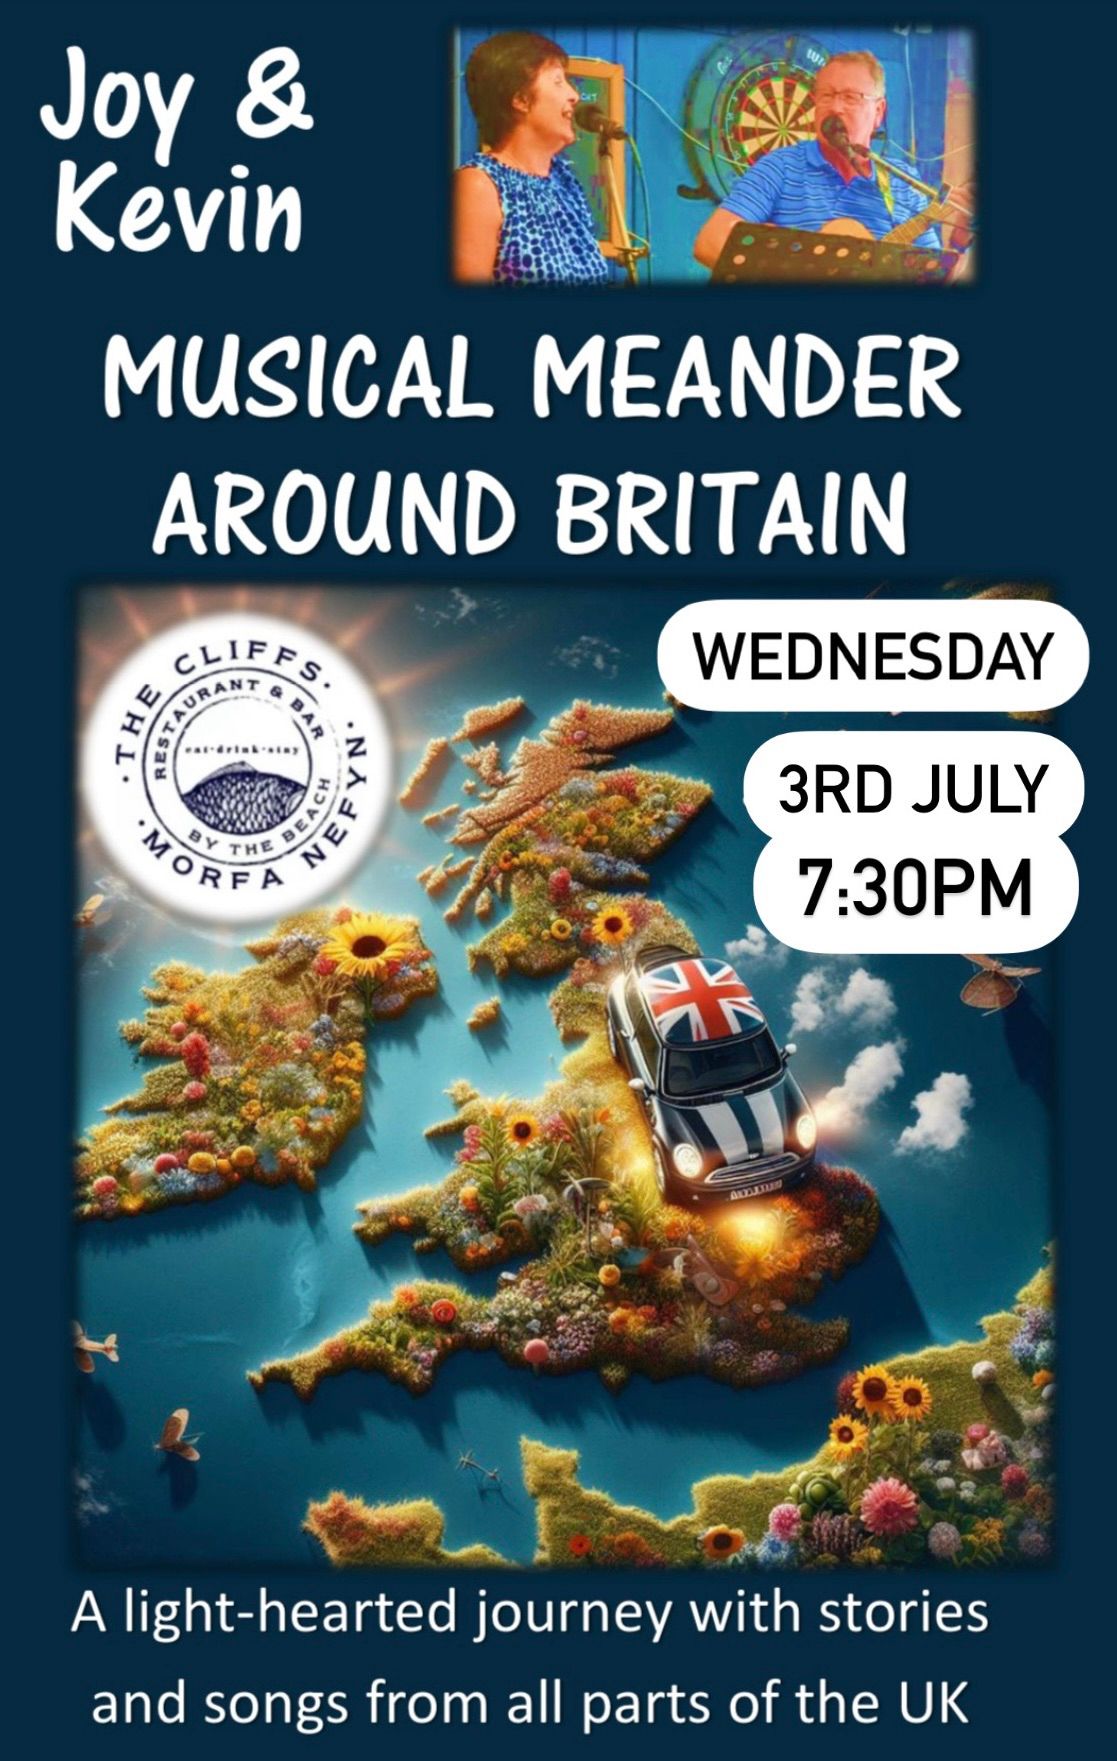 A Musical Meander Around Britain with Joy & Kevin